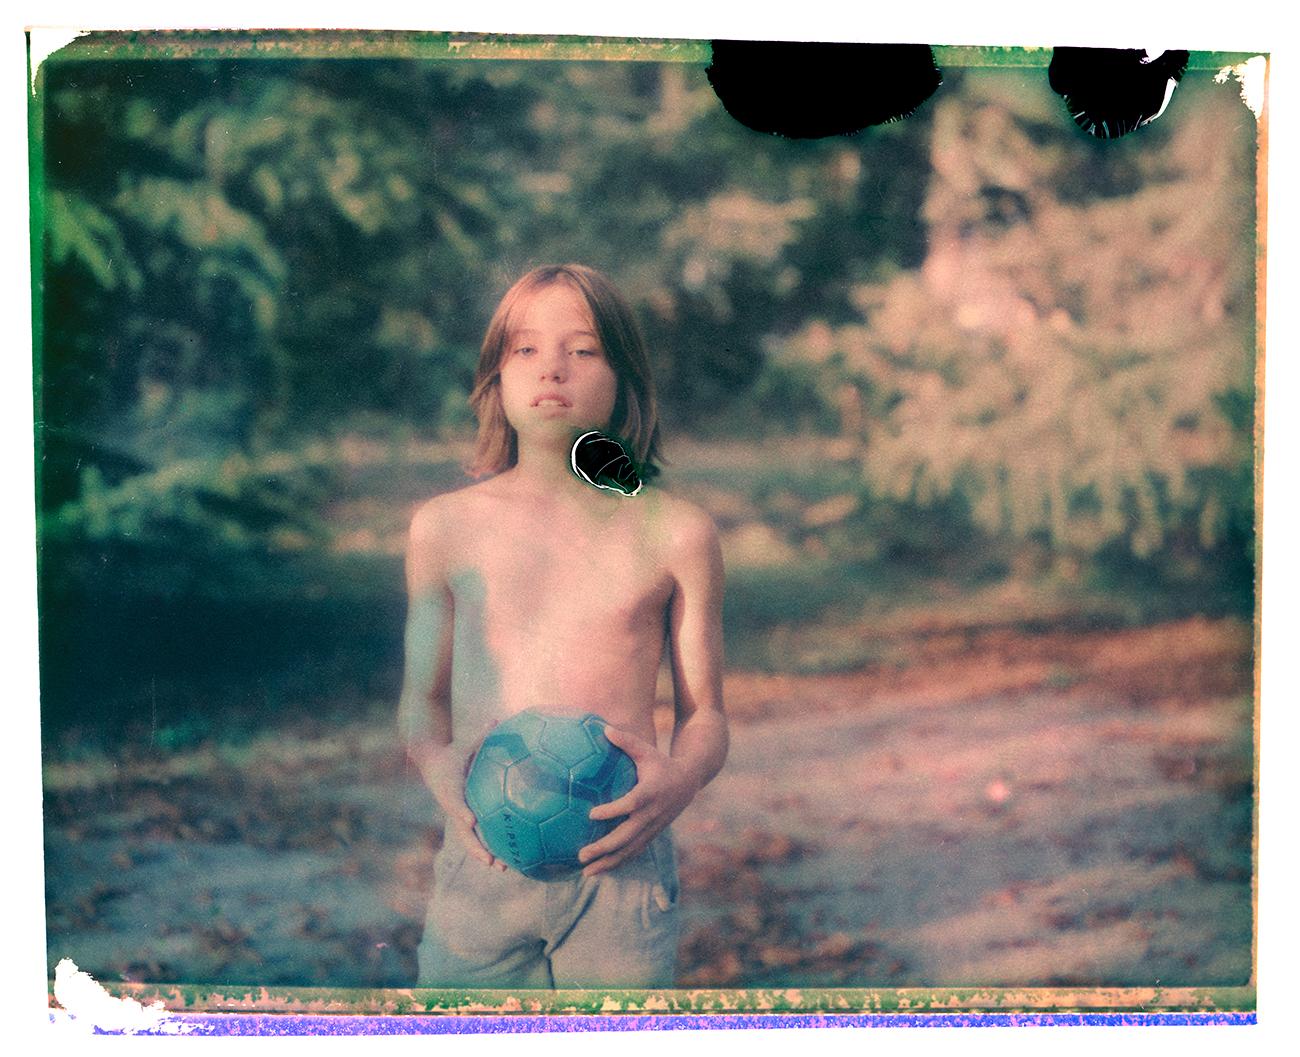 Gil at twelve - Contemporary, Polaroid, Photograph, Childhood, abstract